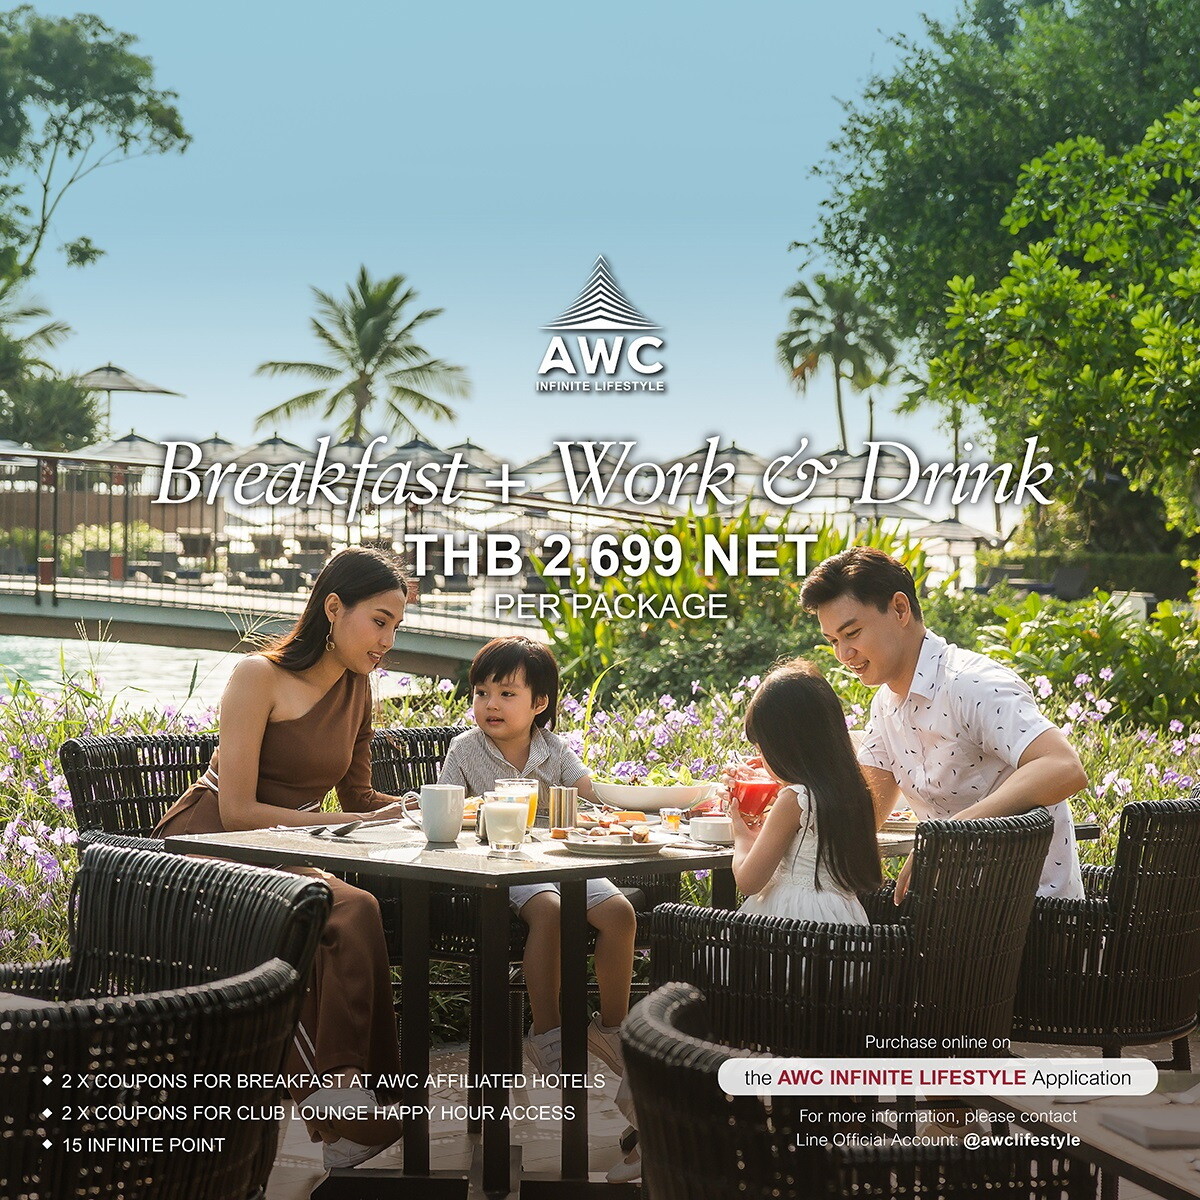 AWC launches exclusive "Happy Hour Club Lounge Package"  offering 3 Packages for 3 Lifestyles for work and leisure from leading hotels and resorts across Thailand